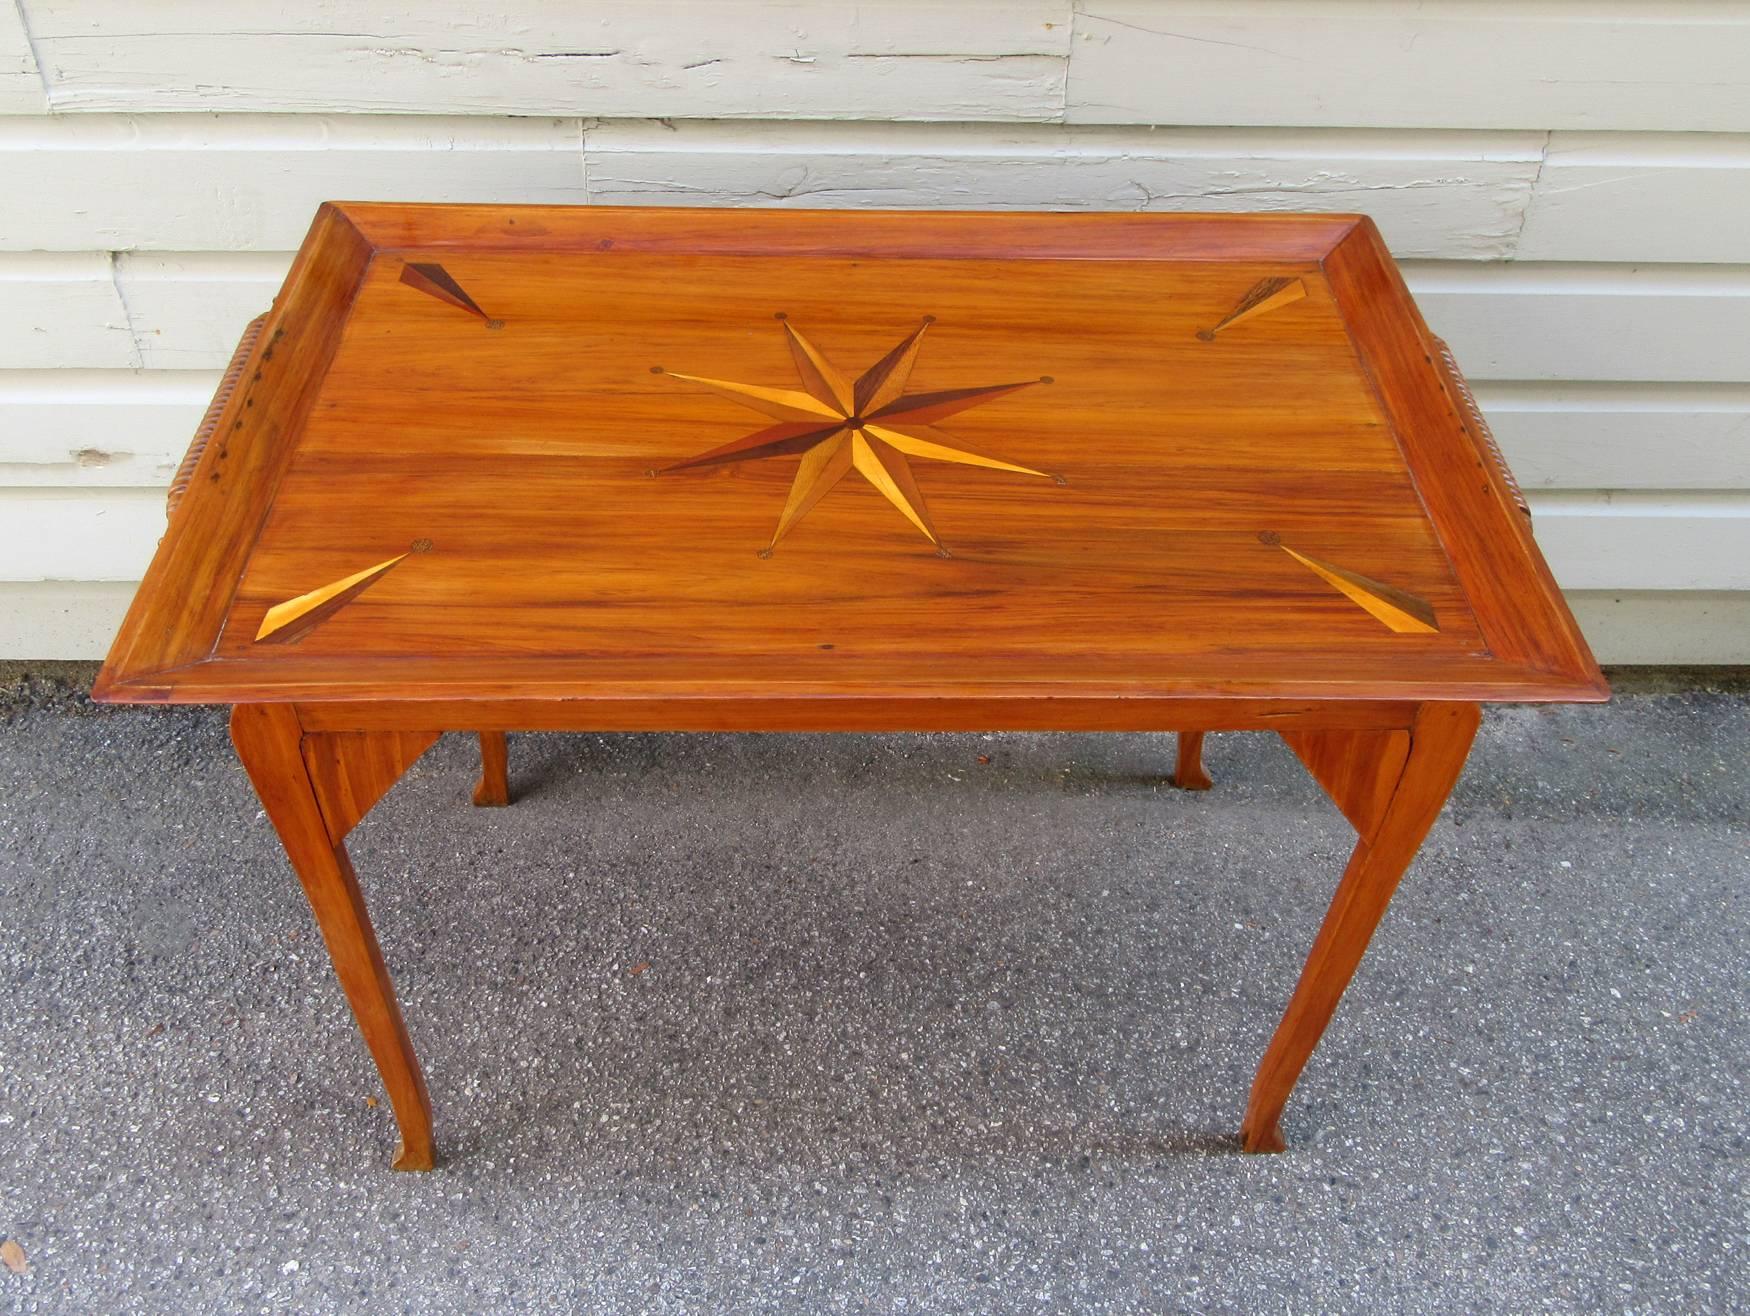 A solid 19th century Jamaican Regency yucca tray table with matching stand, circa 1840, featuring a tray top with compass shaped exotic wood specimen inlay and finely turned spooled rolling pin handles.